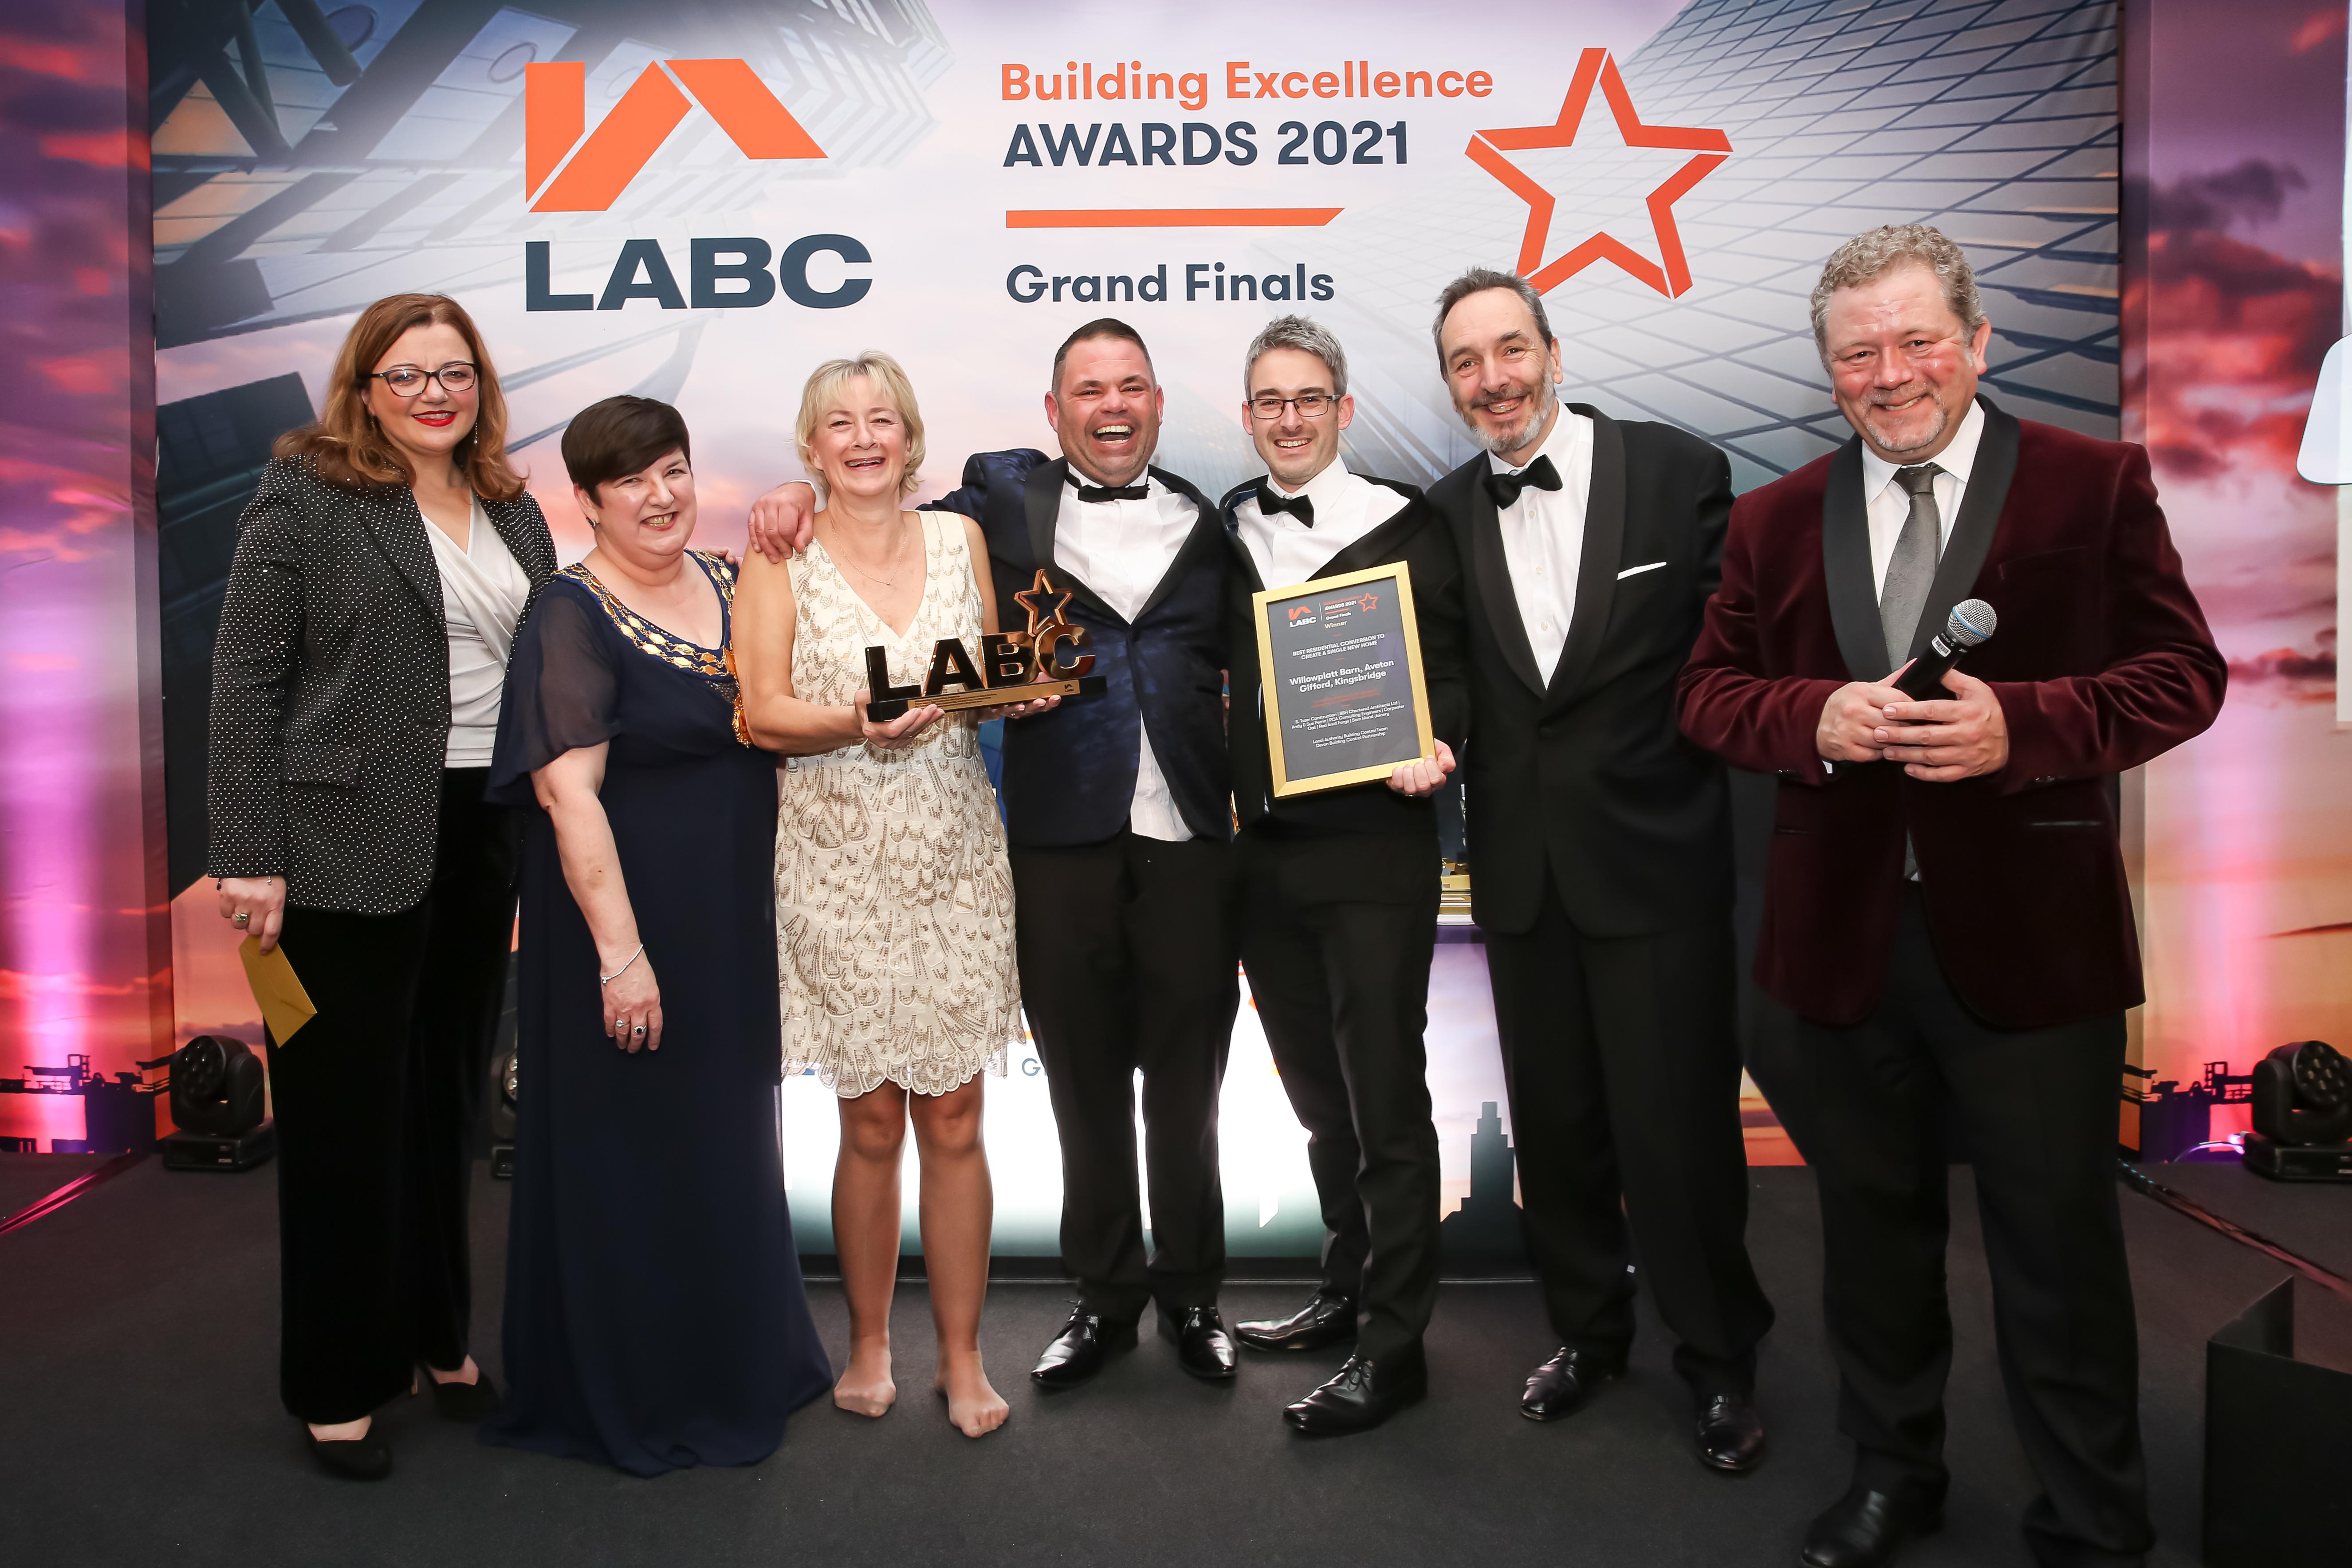 Andy & Sue Perrin – Winners of Best Residential Conversion to Create a Single New Home – LABC Grand Finals 2021